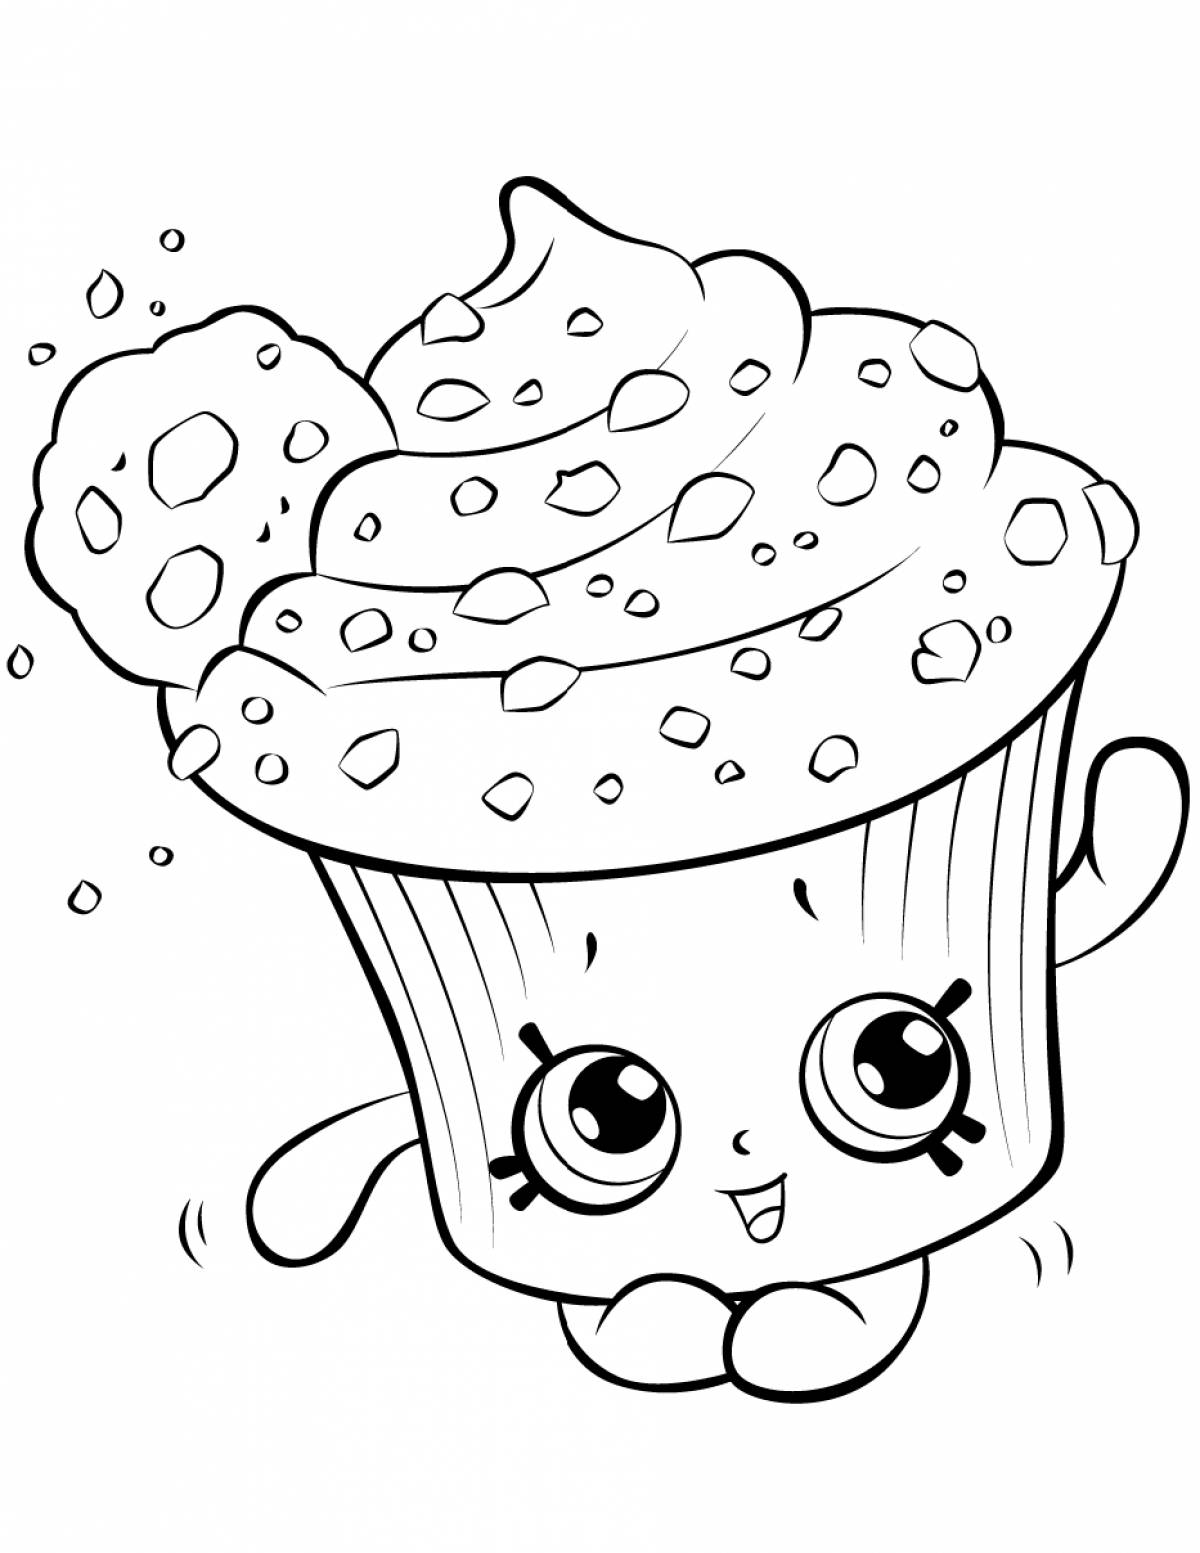 Attractive sweets coloring pages for girls